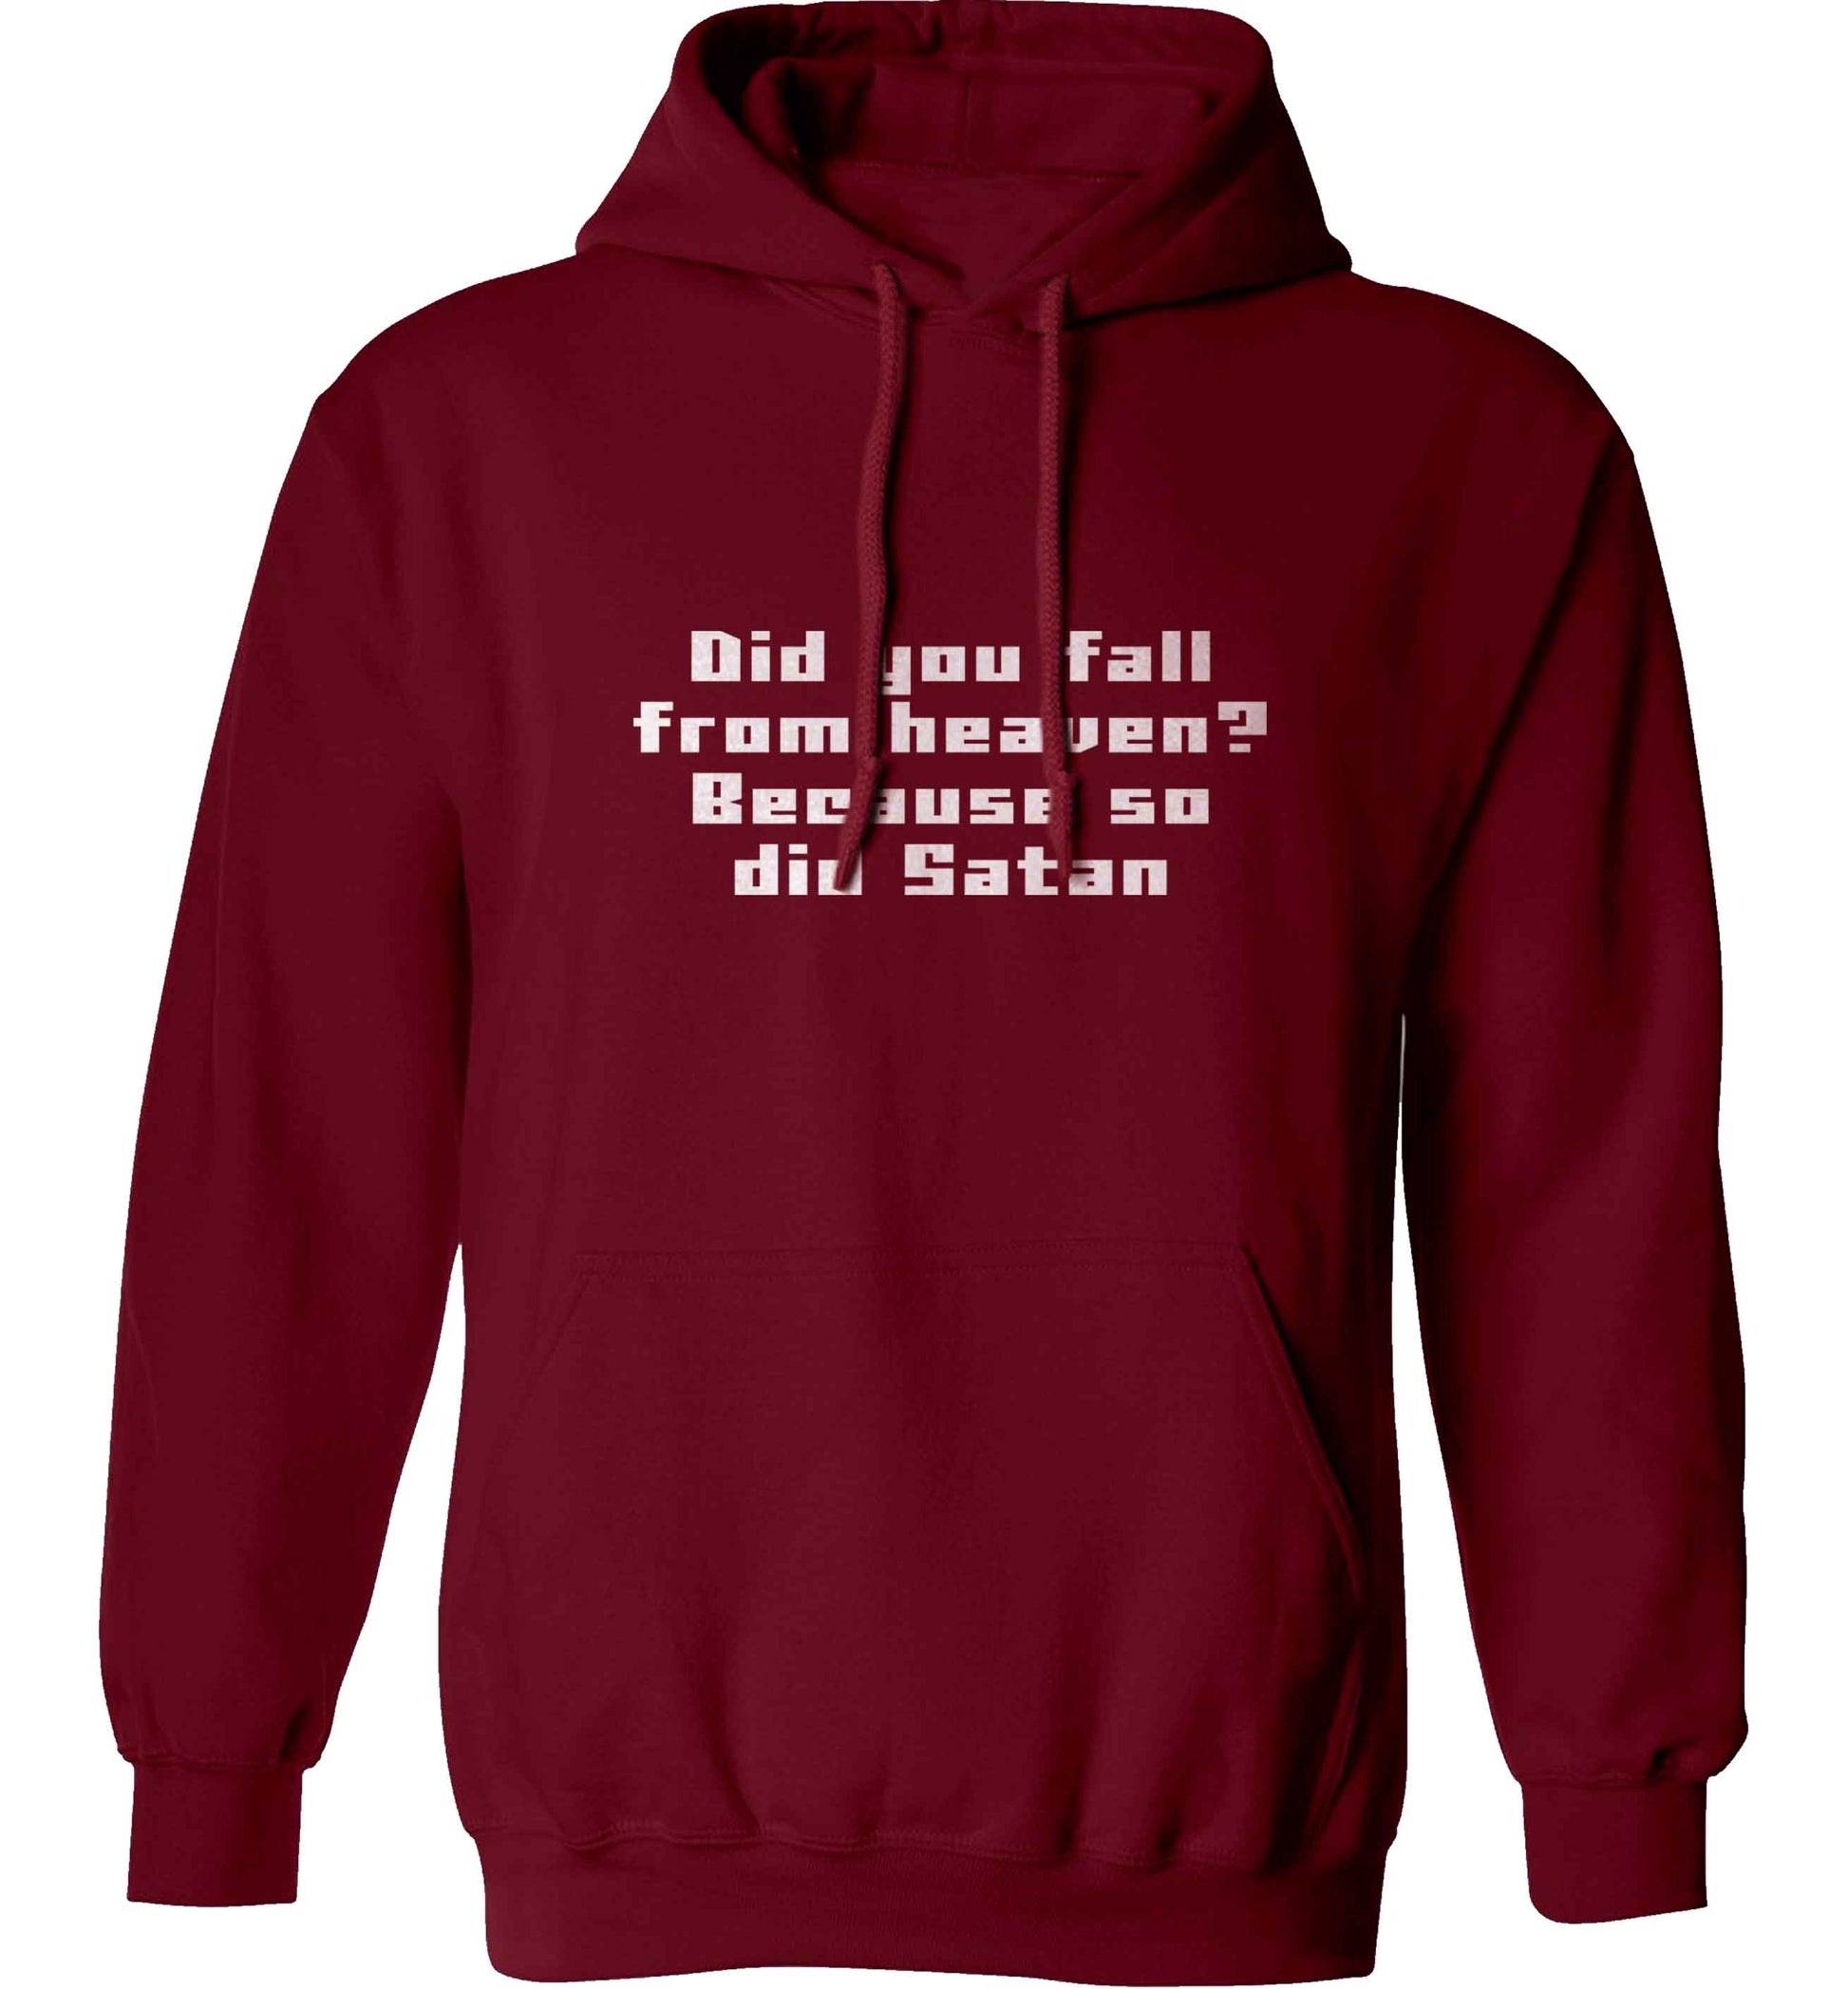 Did you fall from Heaven because so did Satan adults unisex maroon hoodie 2XL